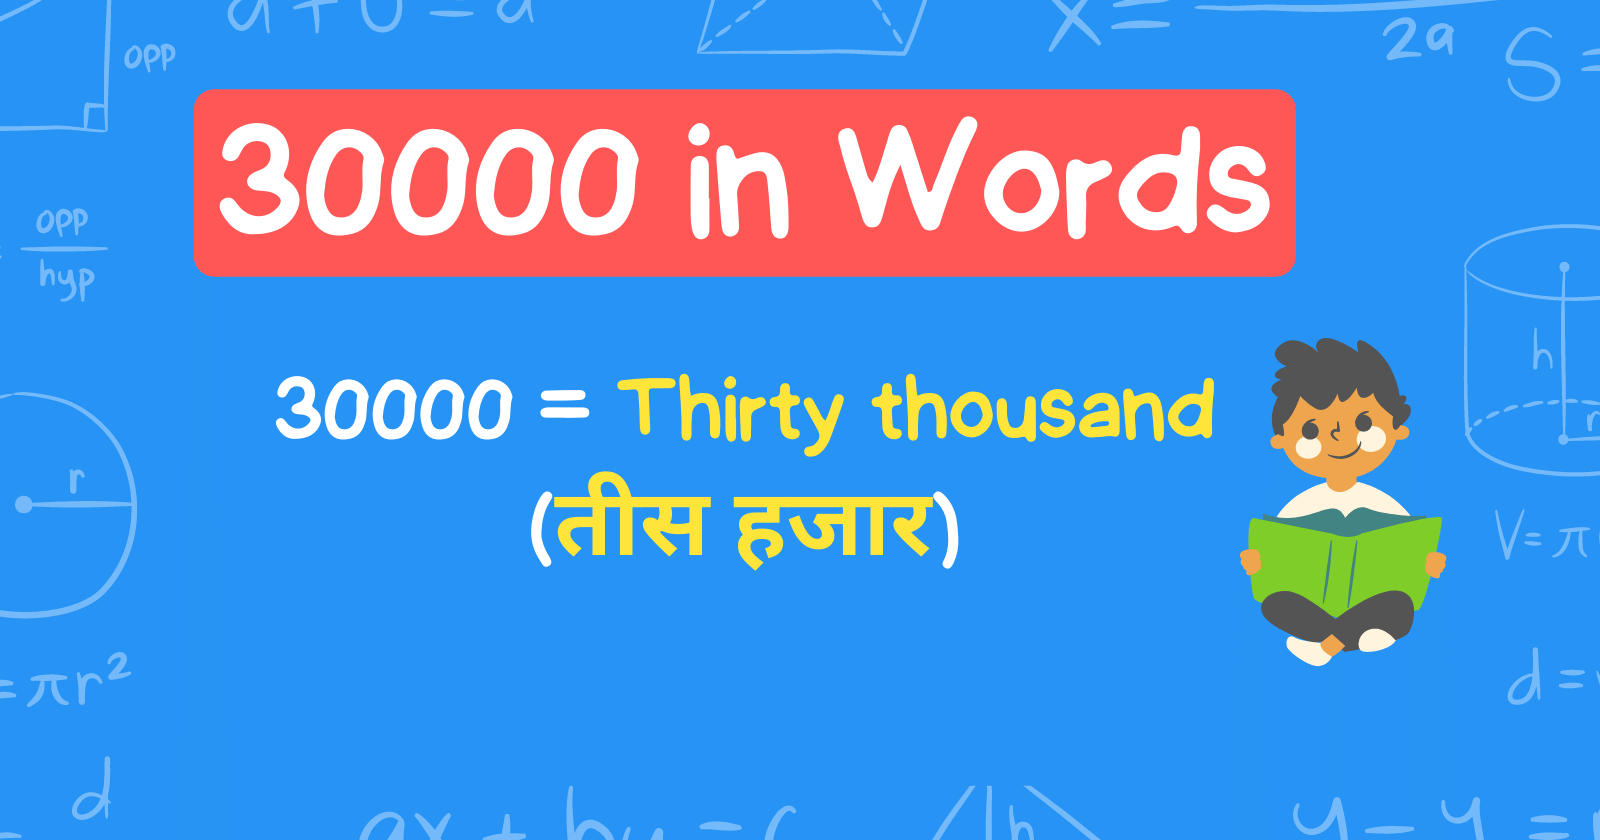 30000 in words (Thirty thousand)